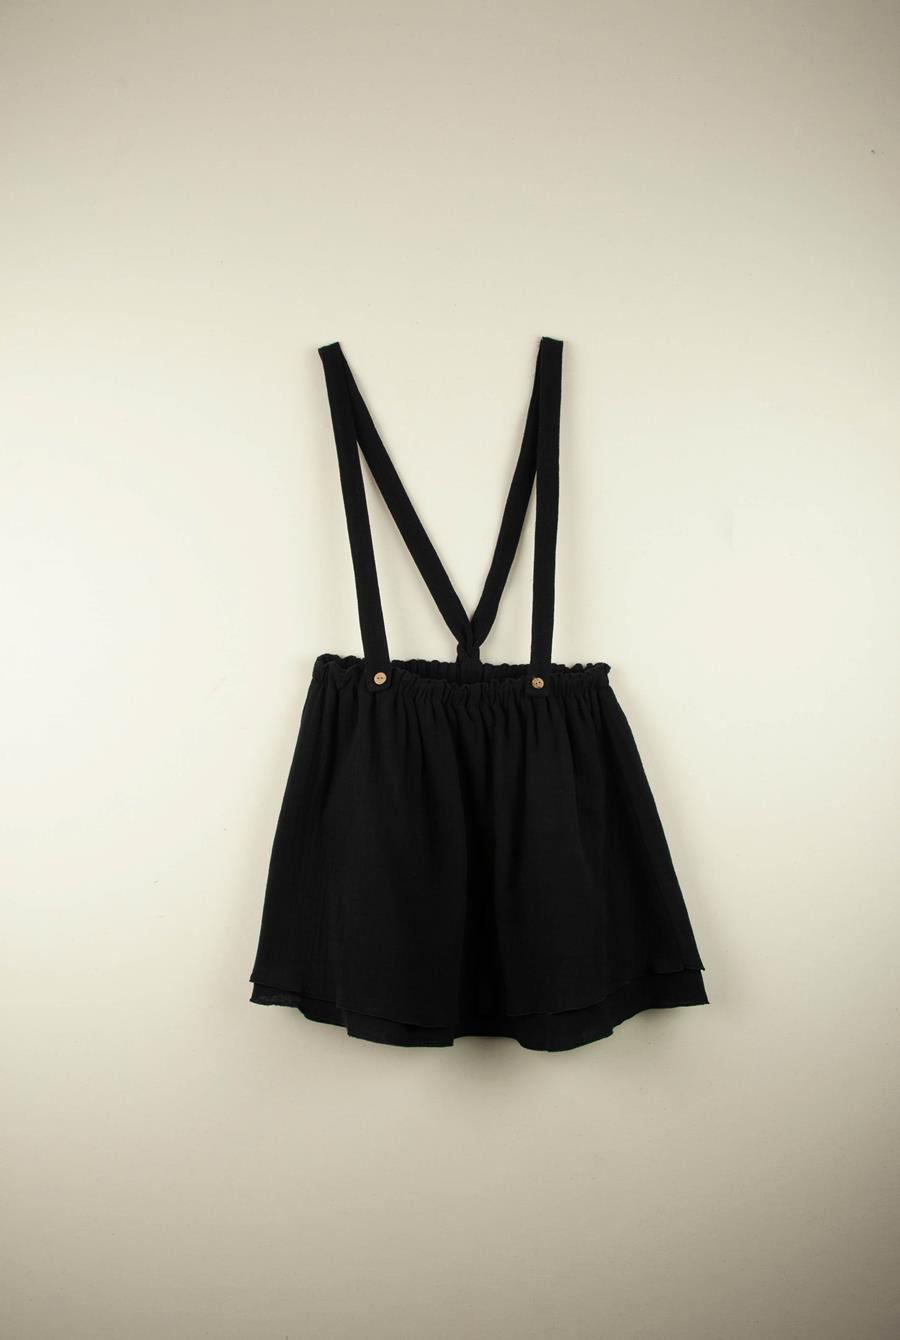 Mod.20.3 Black skirt with removable straps | AW21.22 Mod.20.3 Black skirt with removable straps